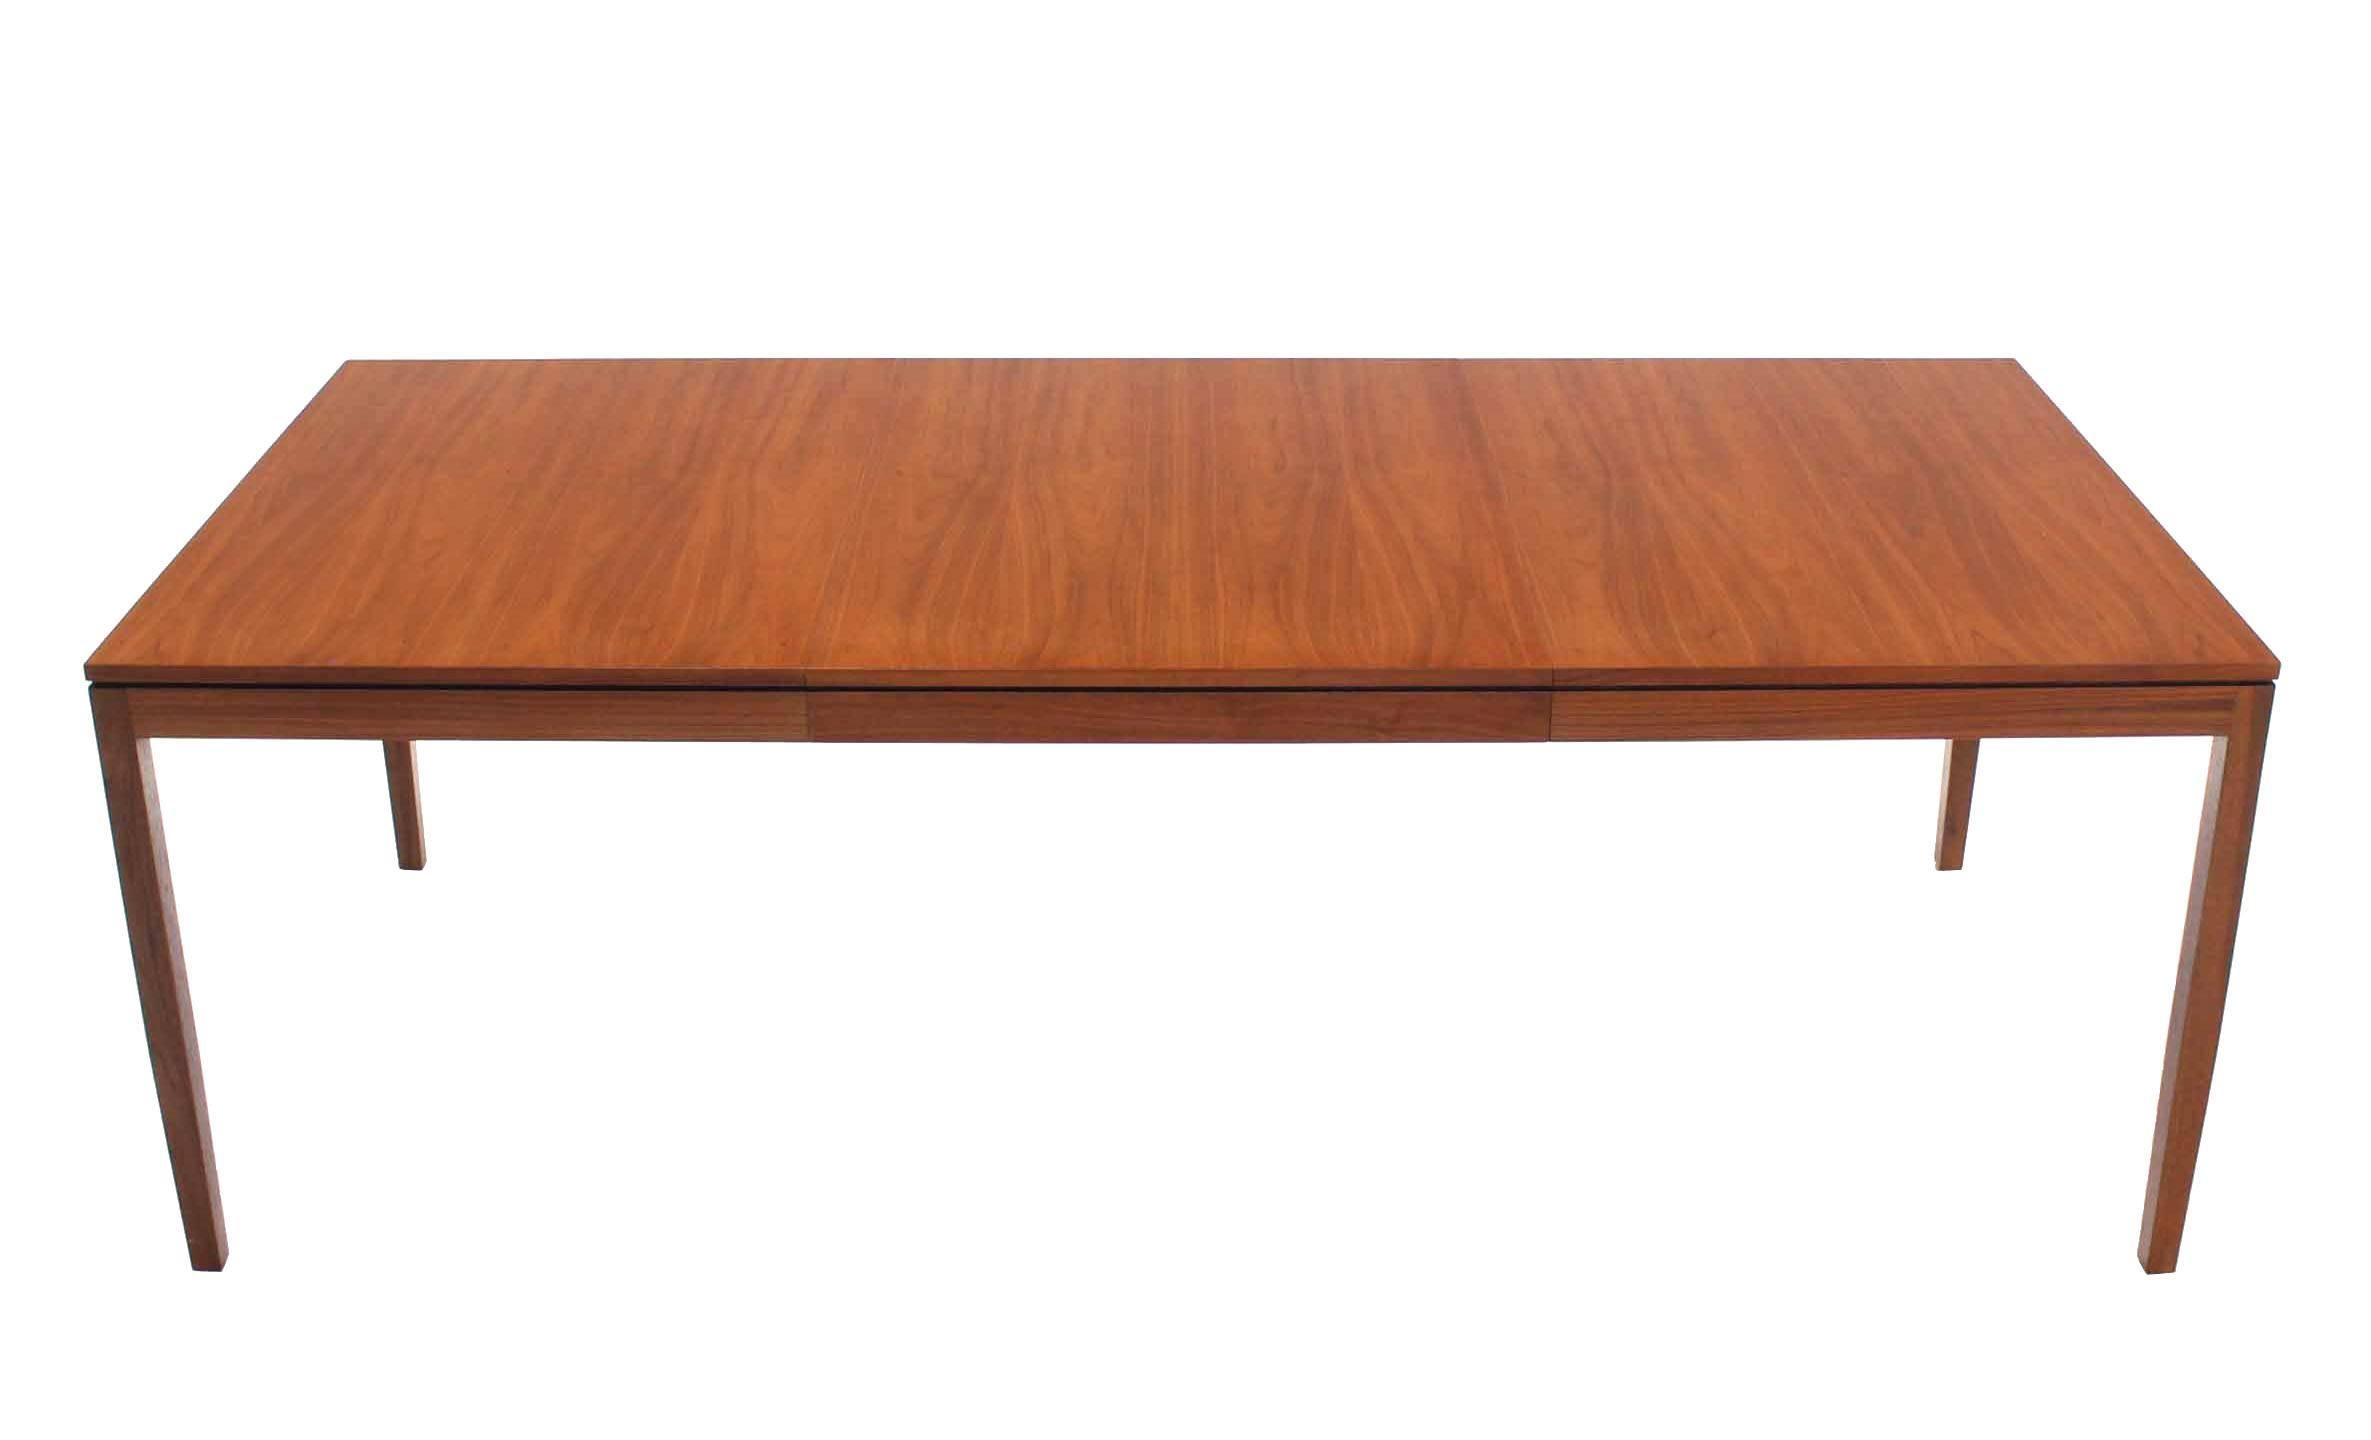 Mid-Century Modern Outstanding Quality Walnut Dining Room Table by Knoll